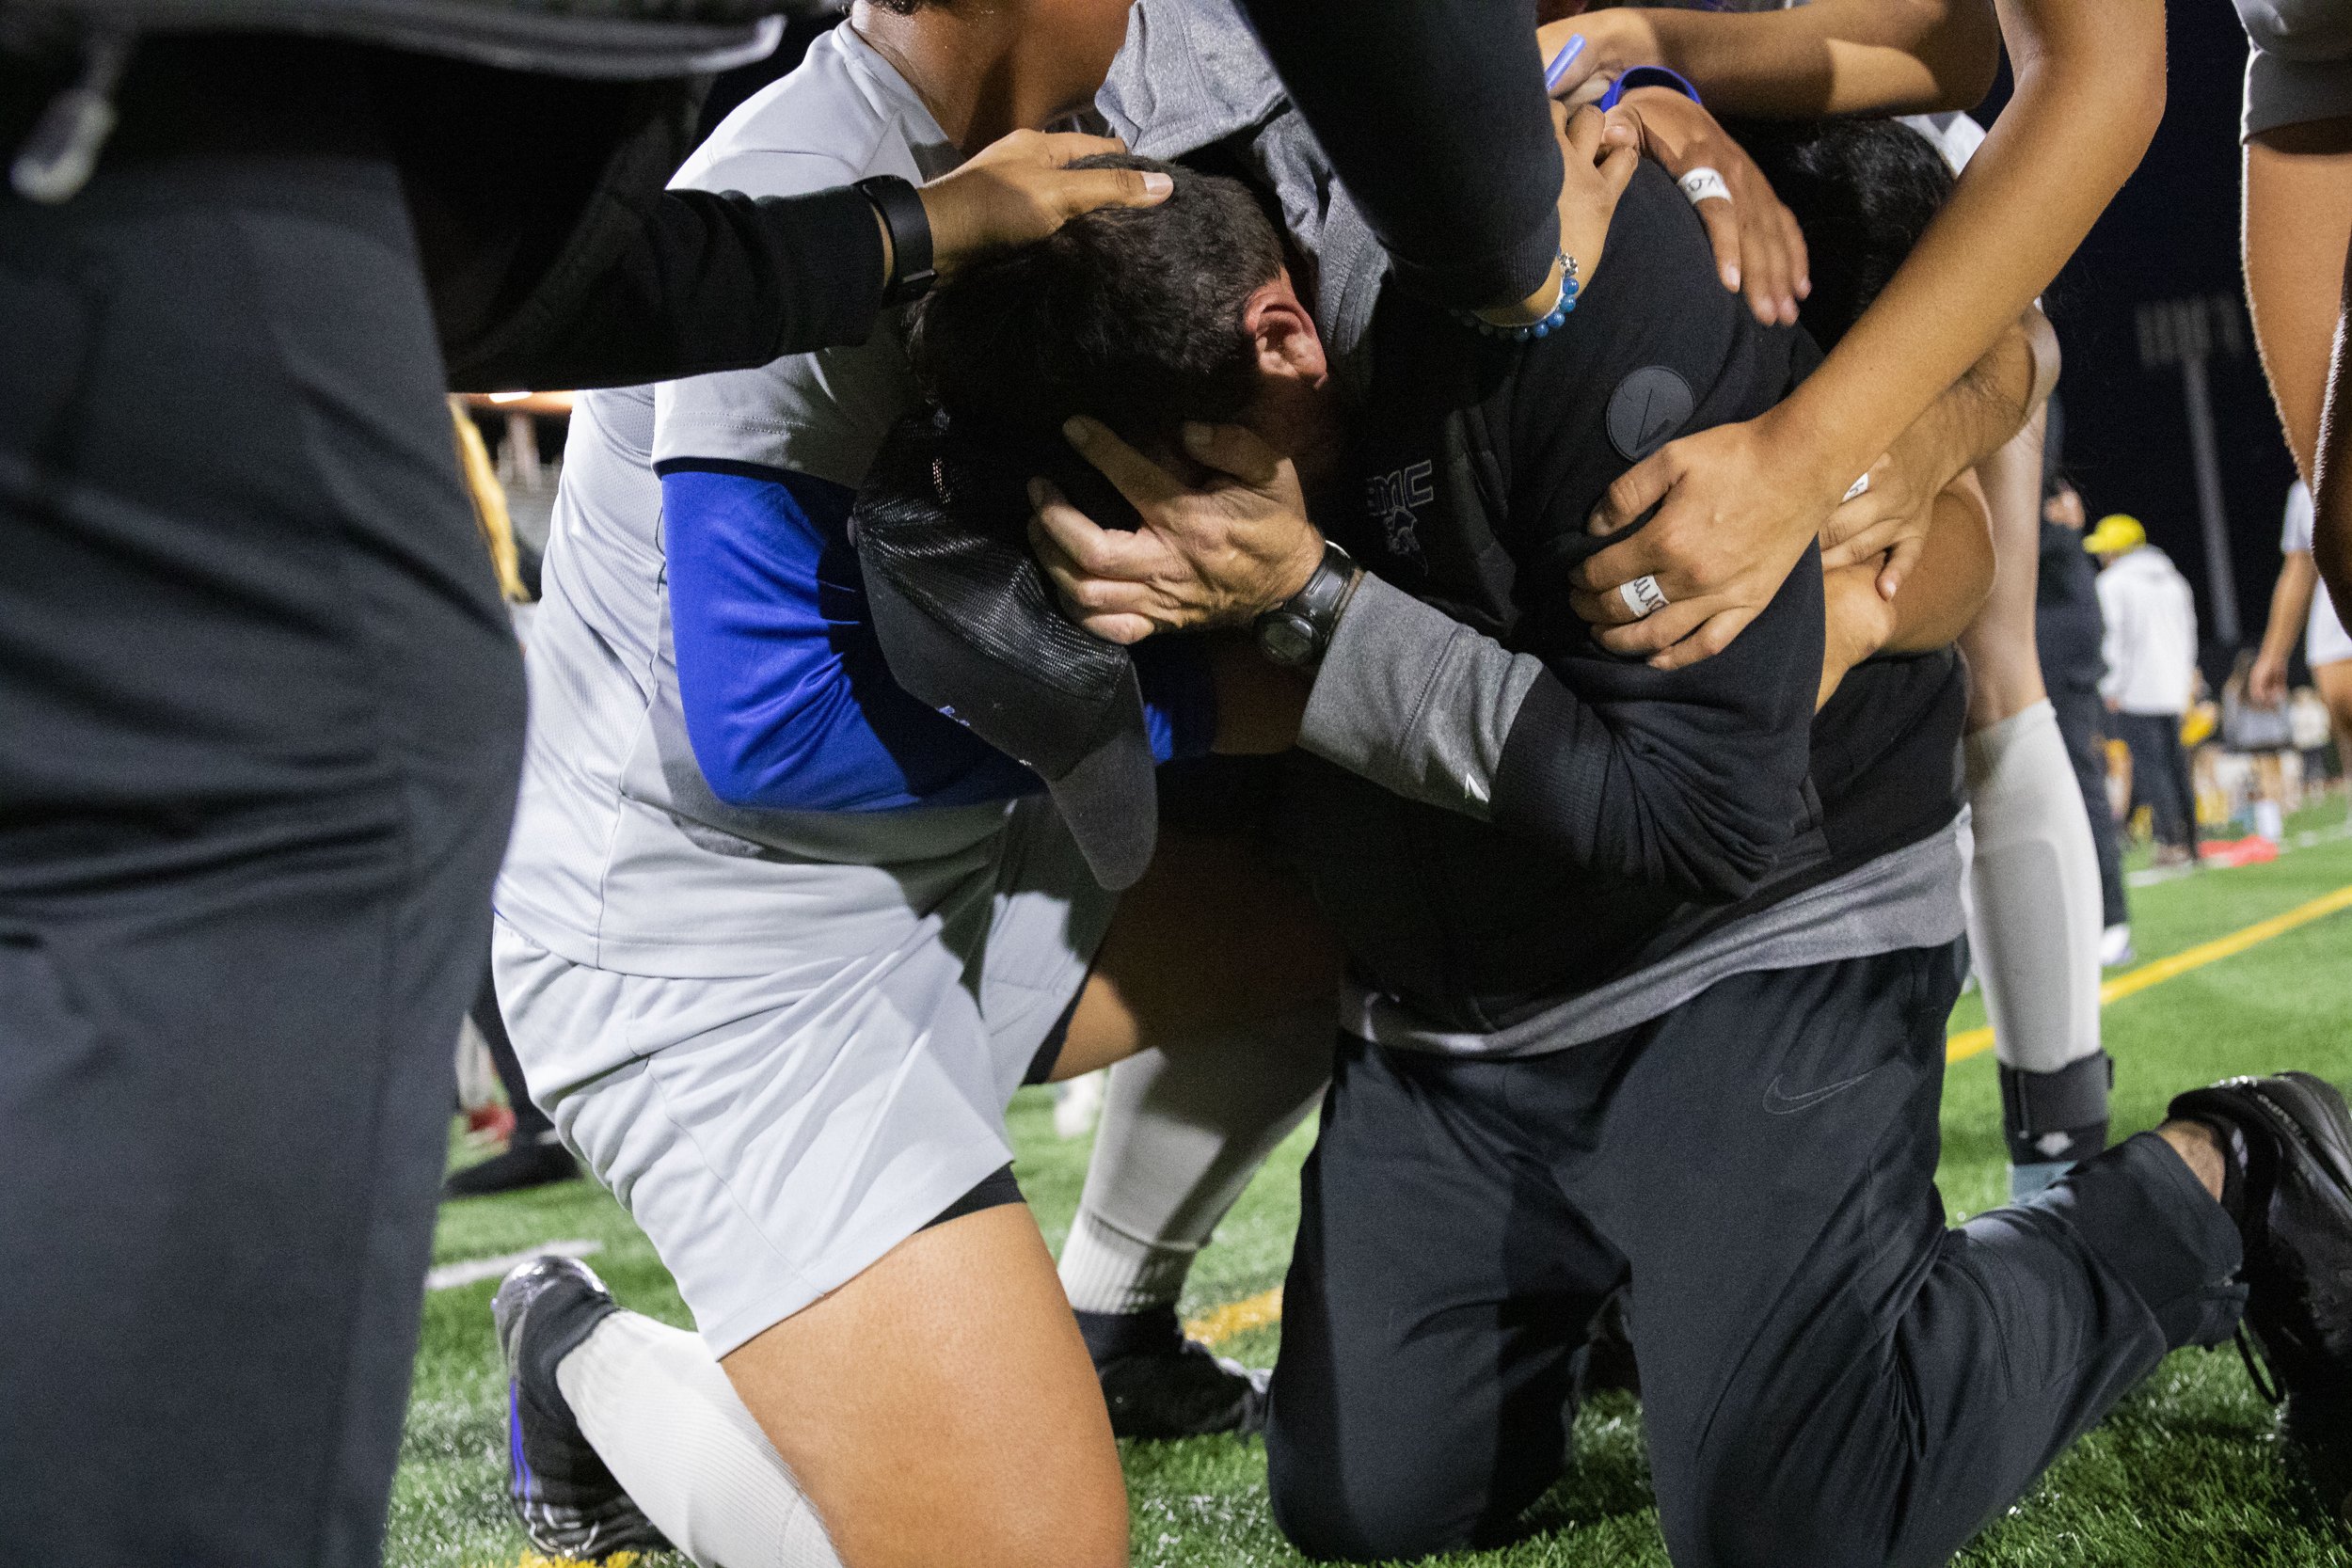  Santa Monica College women’s soccer head coach for the Corsairs Aaron Benditson cries with excitement because the Corsairs defeated the Saddleback College Bobcats, their first defeat of the season, at Saddleback College in Mission Viejo, Calif., on 